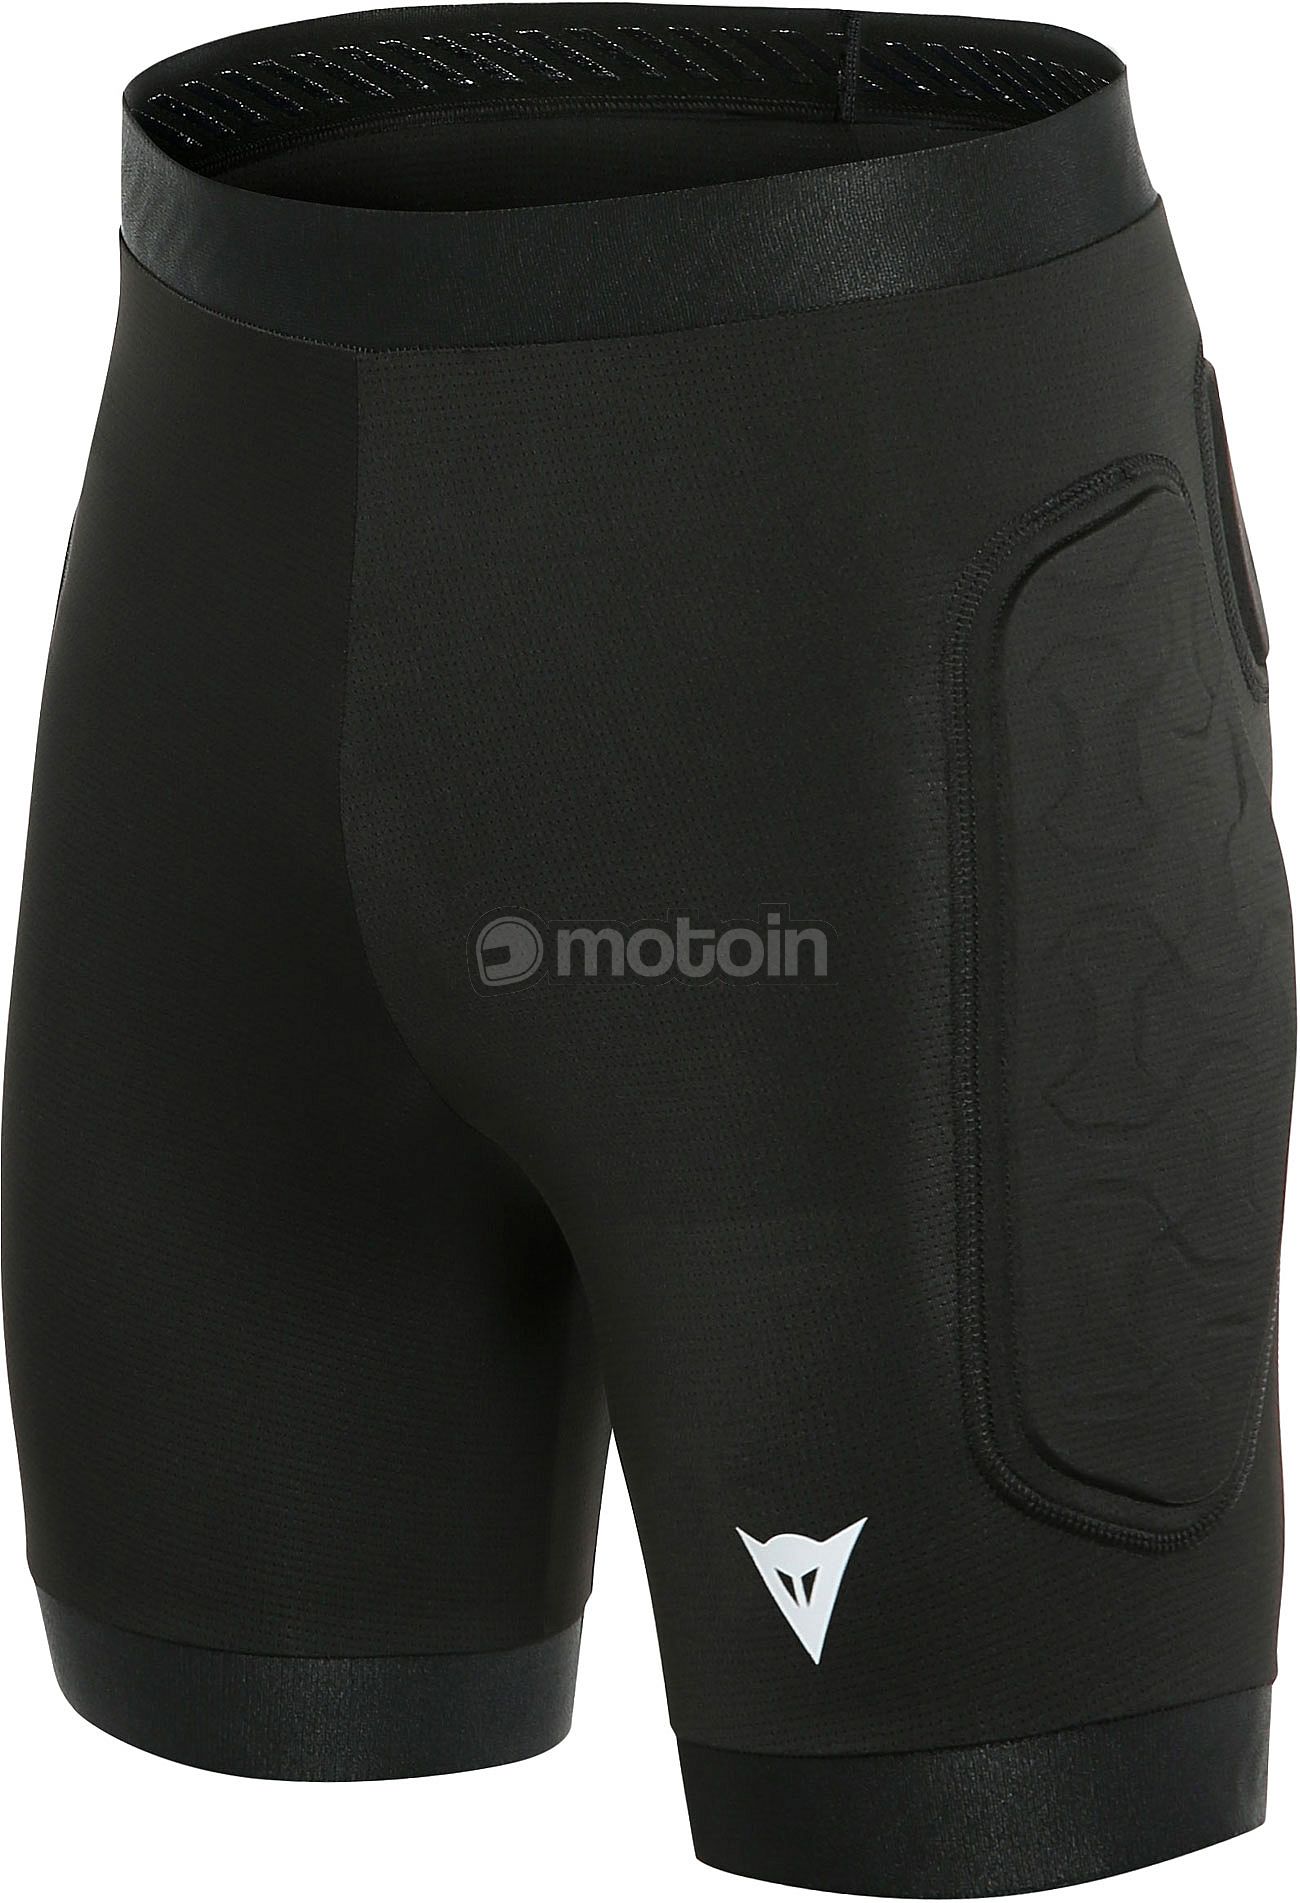 Dainese Rival Pro, protector pants short